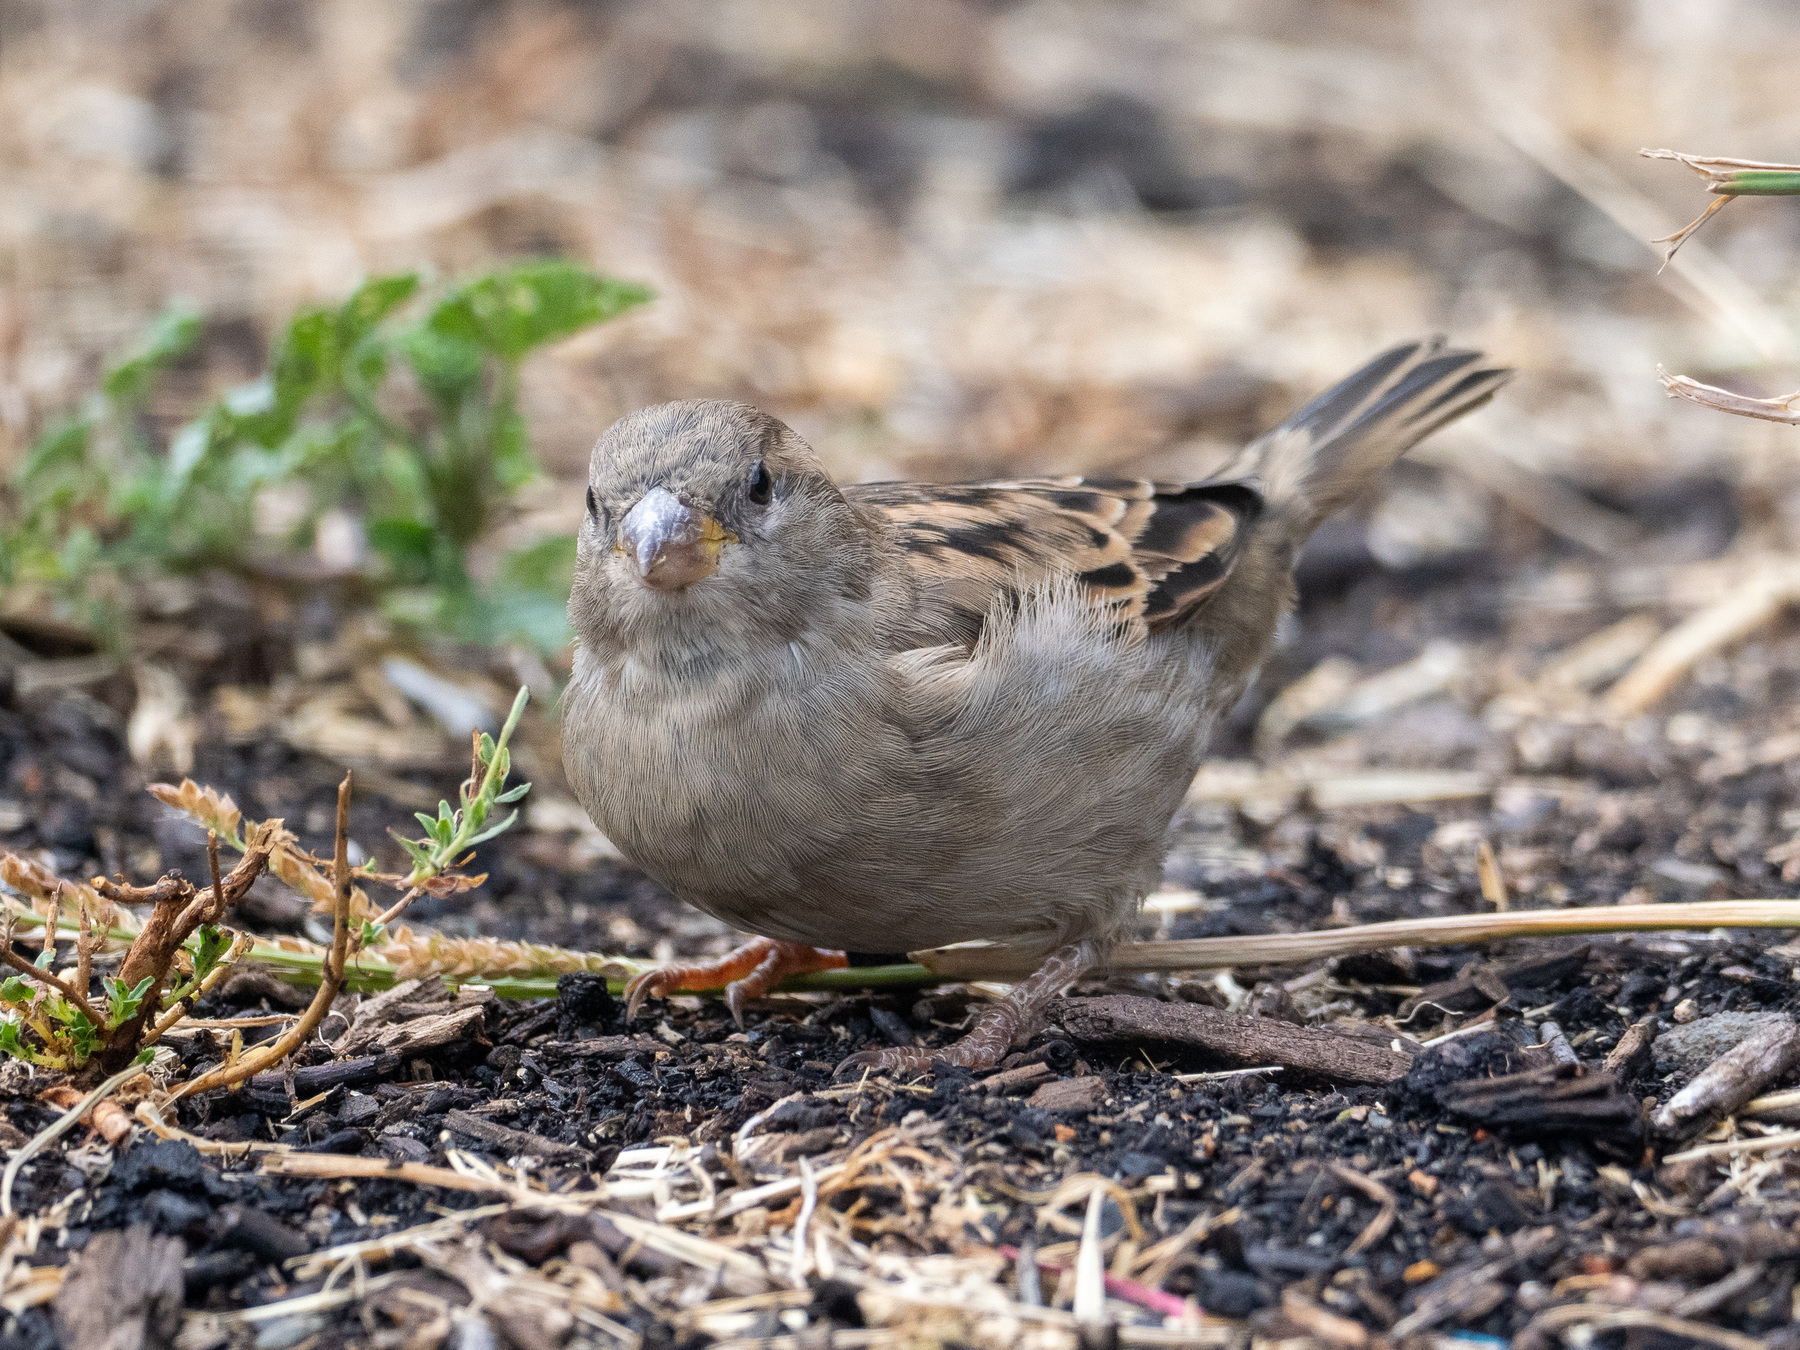 A sparrow on the ground looking on at camera